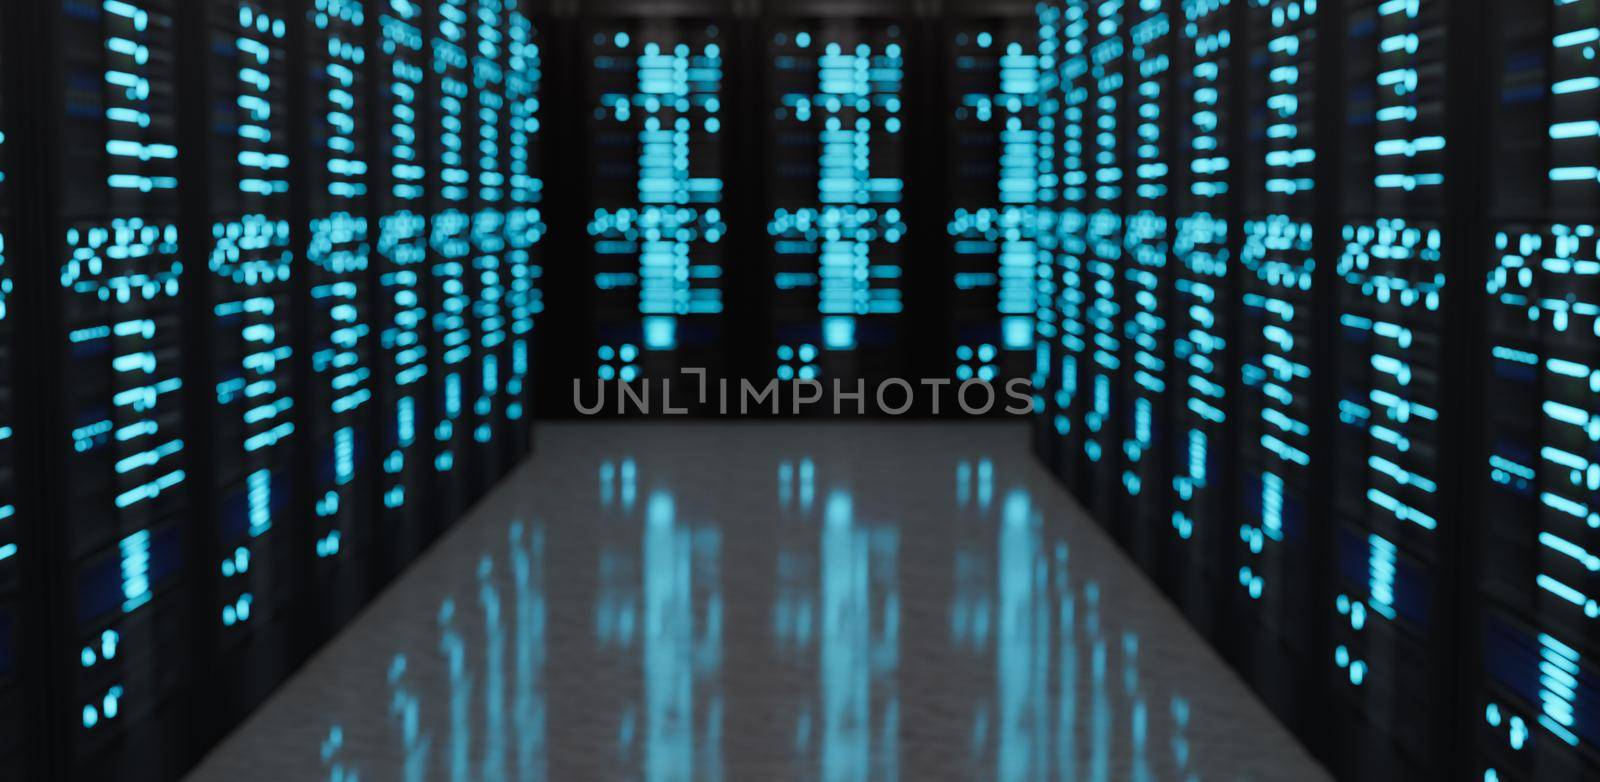 blurred background of a corridor full of servers illuminated with reflective floor. concept of technology, storage and future. 3d render